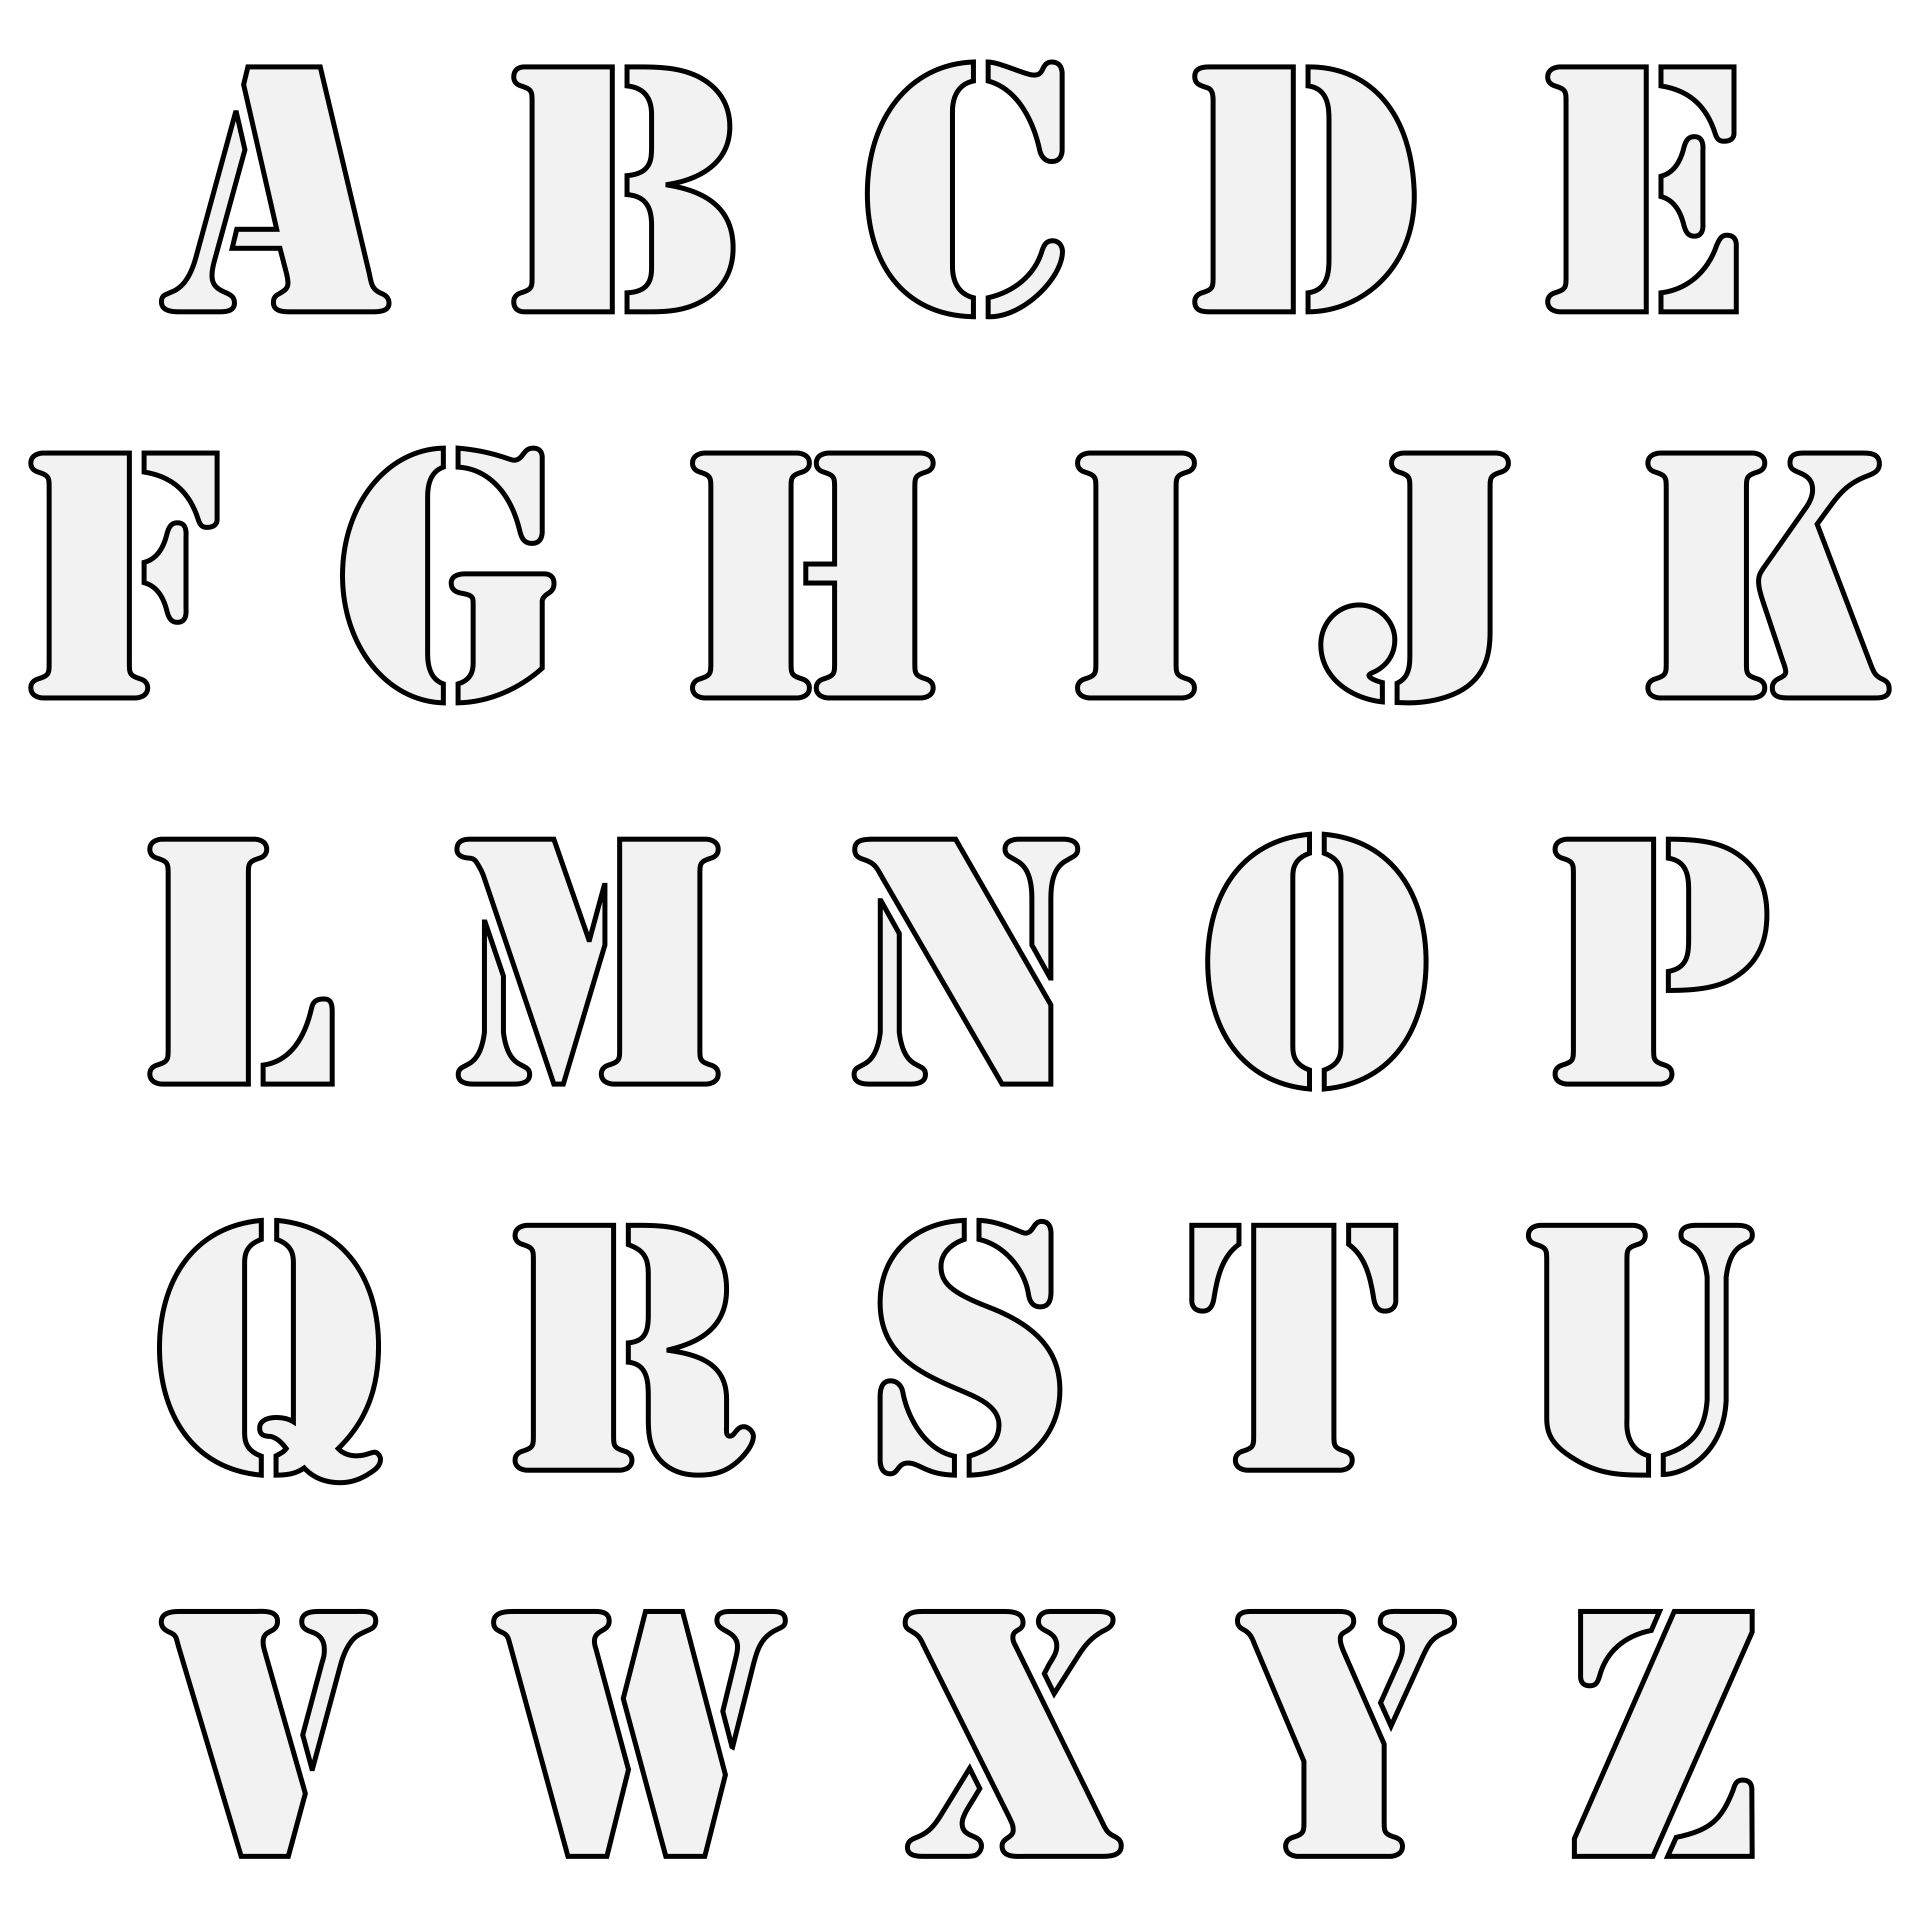 6 Best Images of Printable Cut Out Letters - Free Cut Out Letters ...